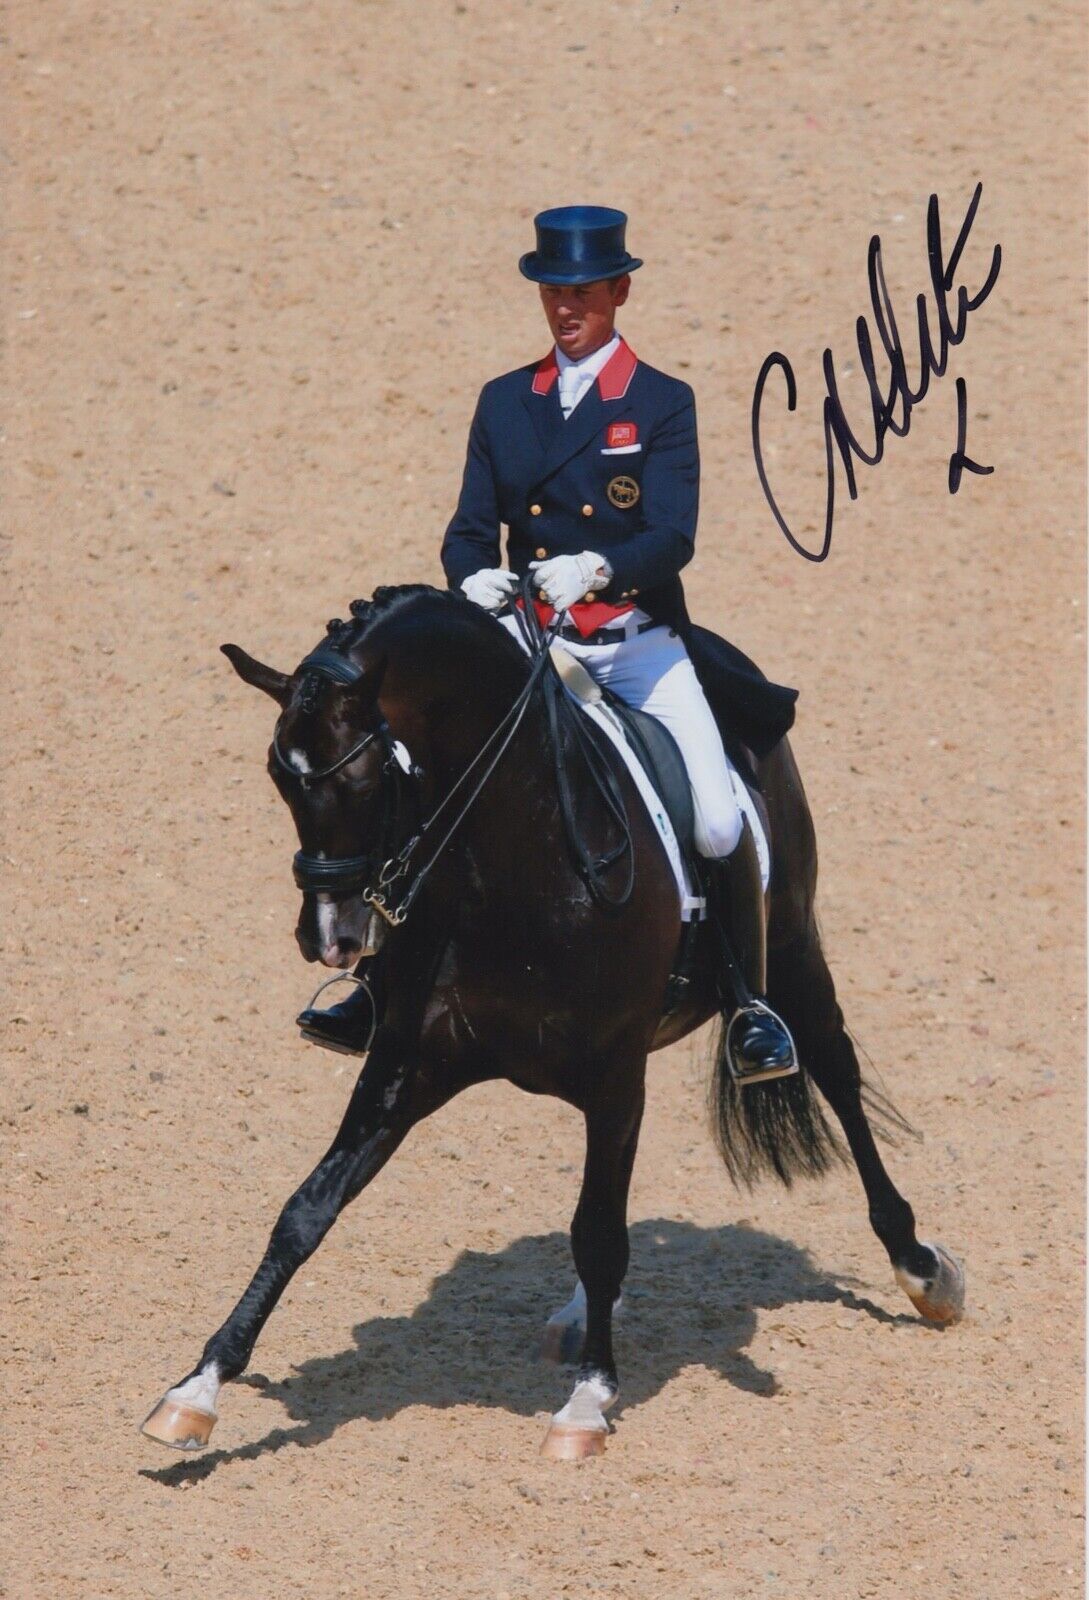 CARL HESTER HAND SIGNED 12X8 Photo Poster painting OLYMPICS AUTOGRAPH LONDON 2012 4